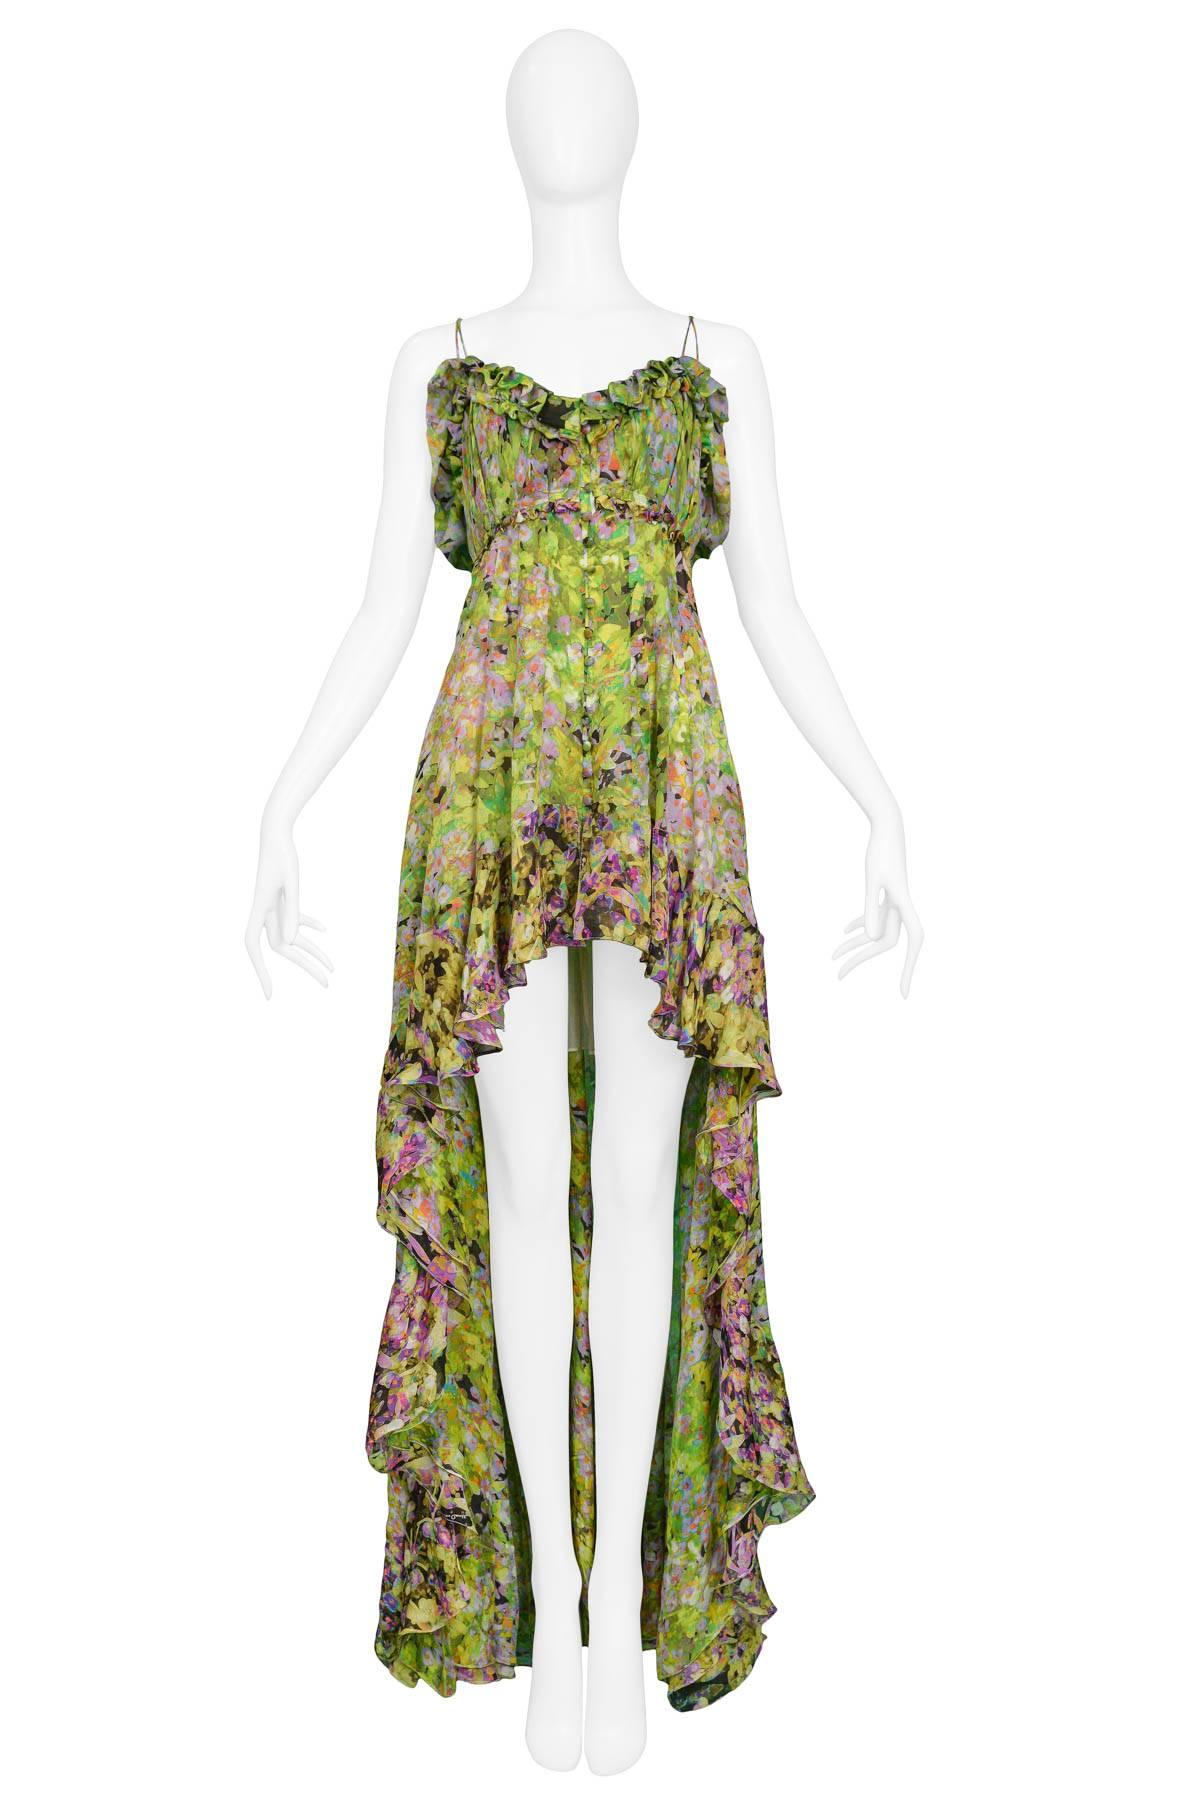 Roberto Cavalli green chiffon floral mini dress with train, sweetheart neckline with ruffle trim, front button closure & gathered flounce hem. 

Excellent Condition. 

Size: Italian 40 